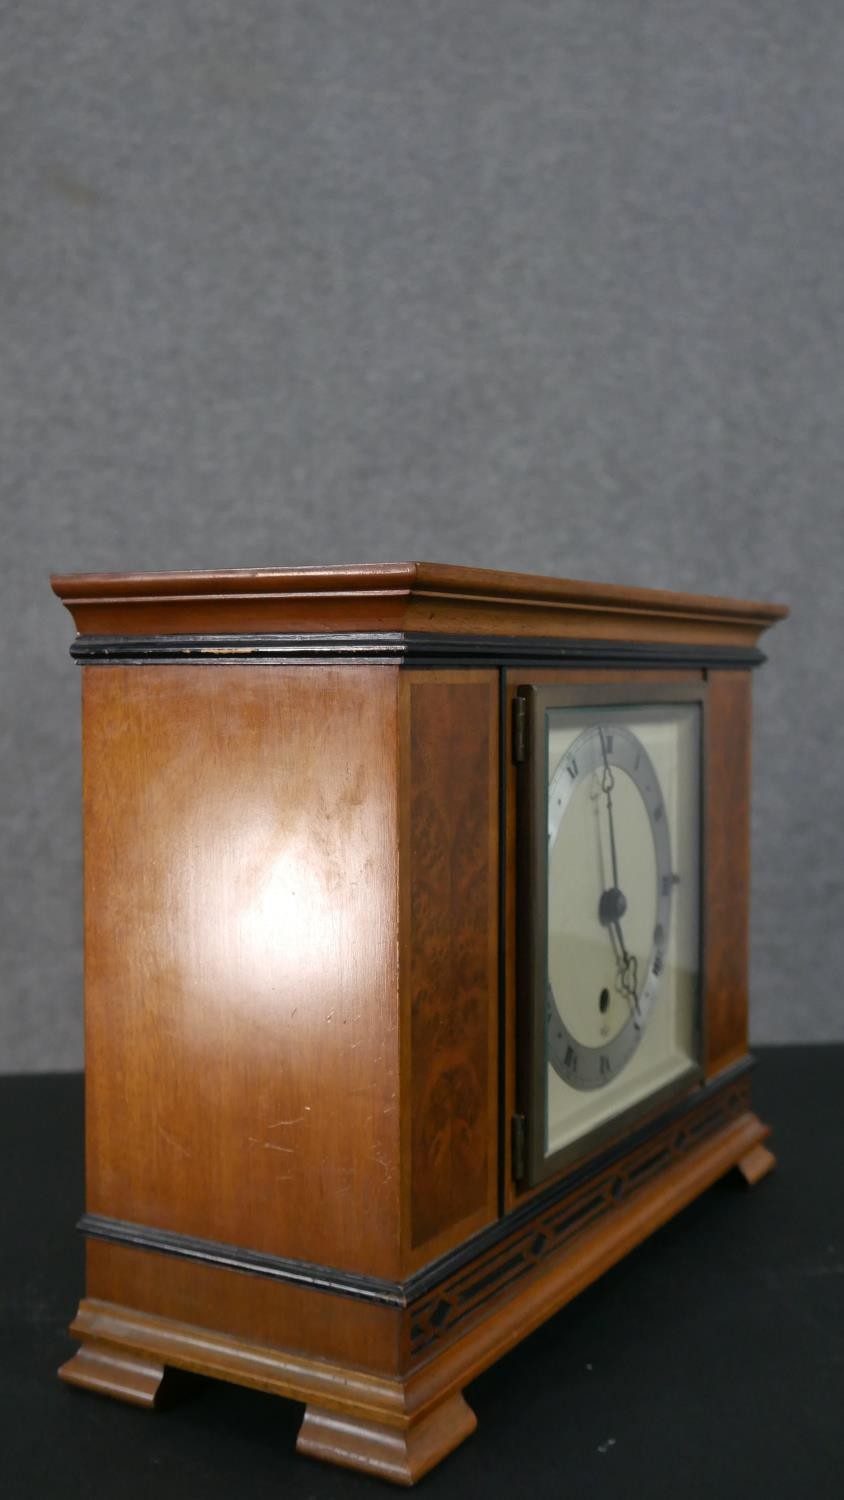 An Art Deco geometric marquetry design Elliot clock, brass movement and brushed chrome ring dial - Image 5 of 11